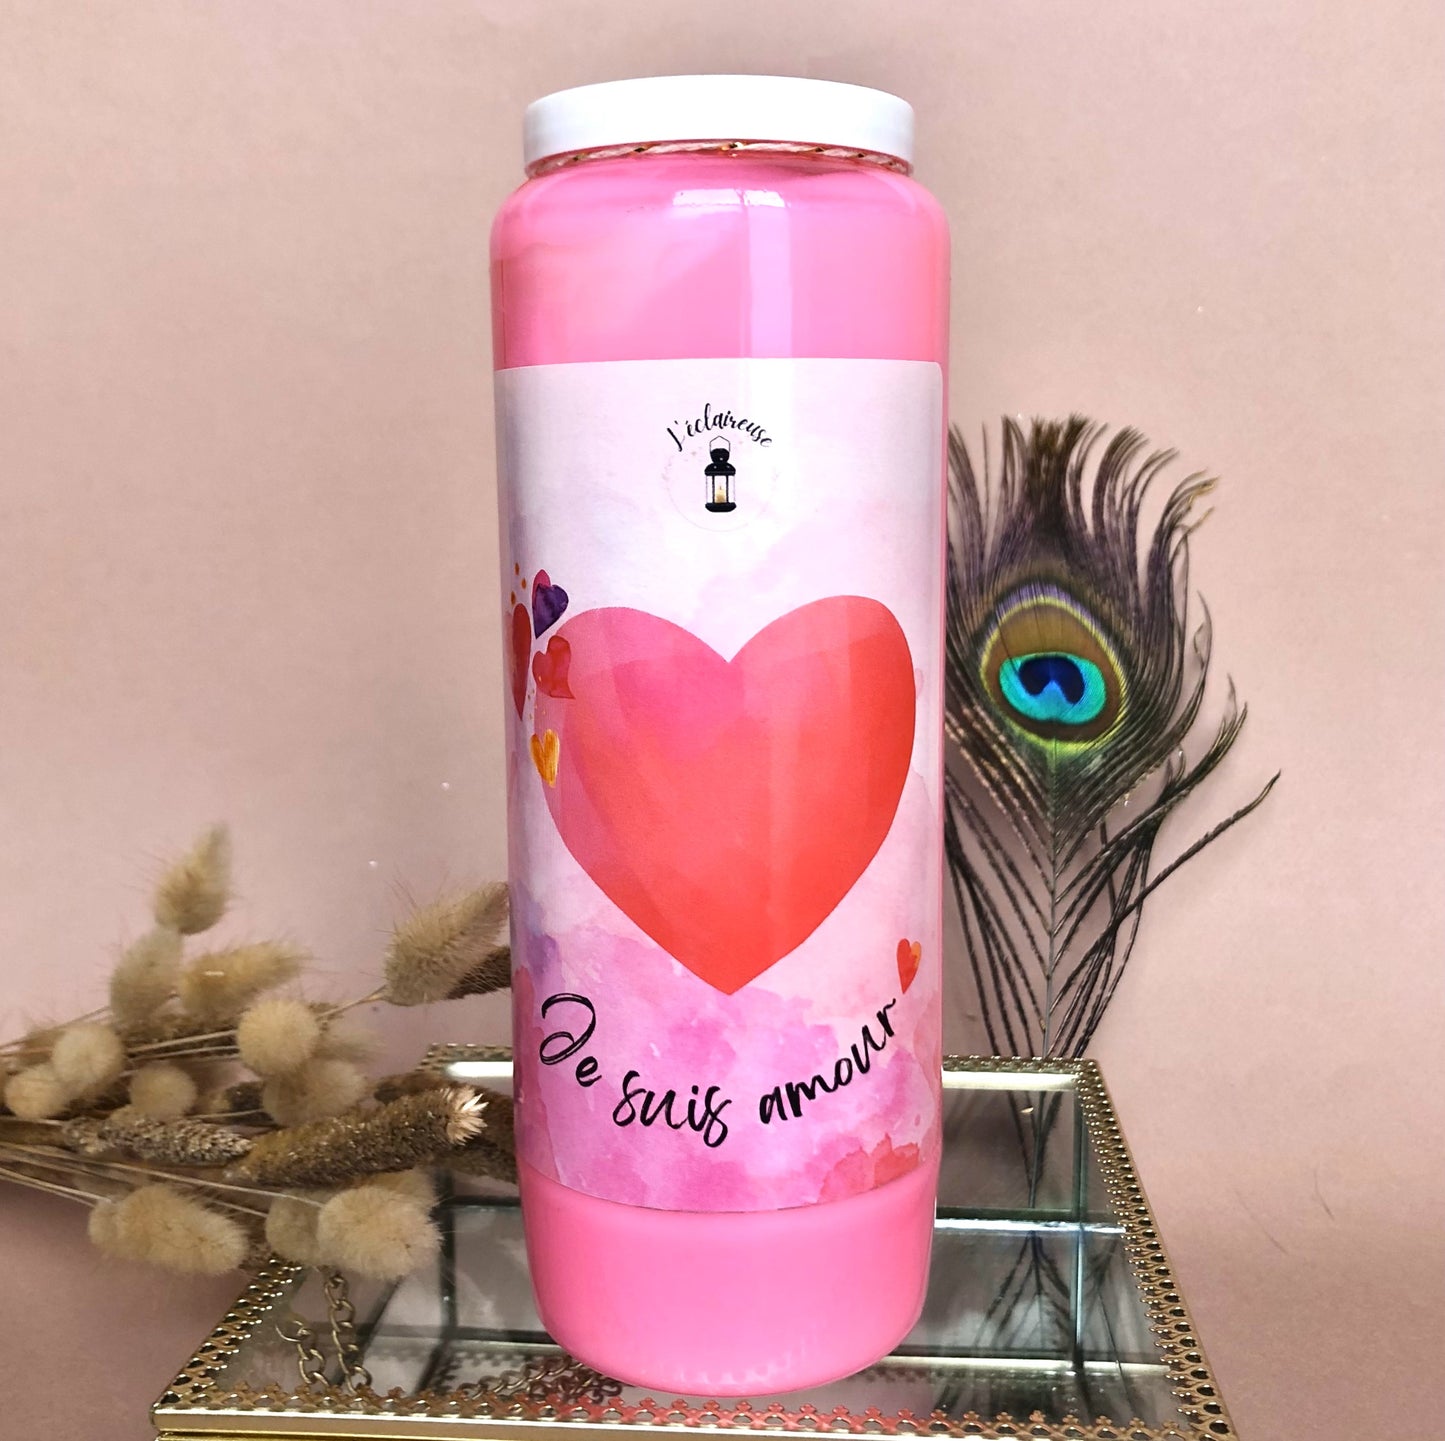 Novena candle "I am love" ~to find love~